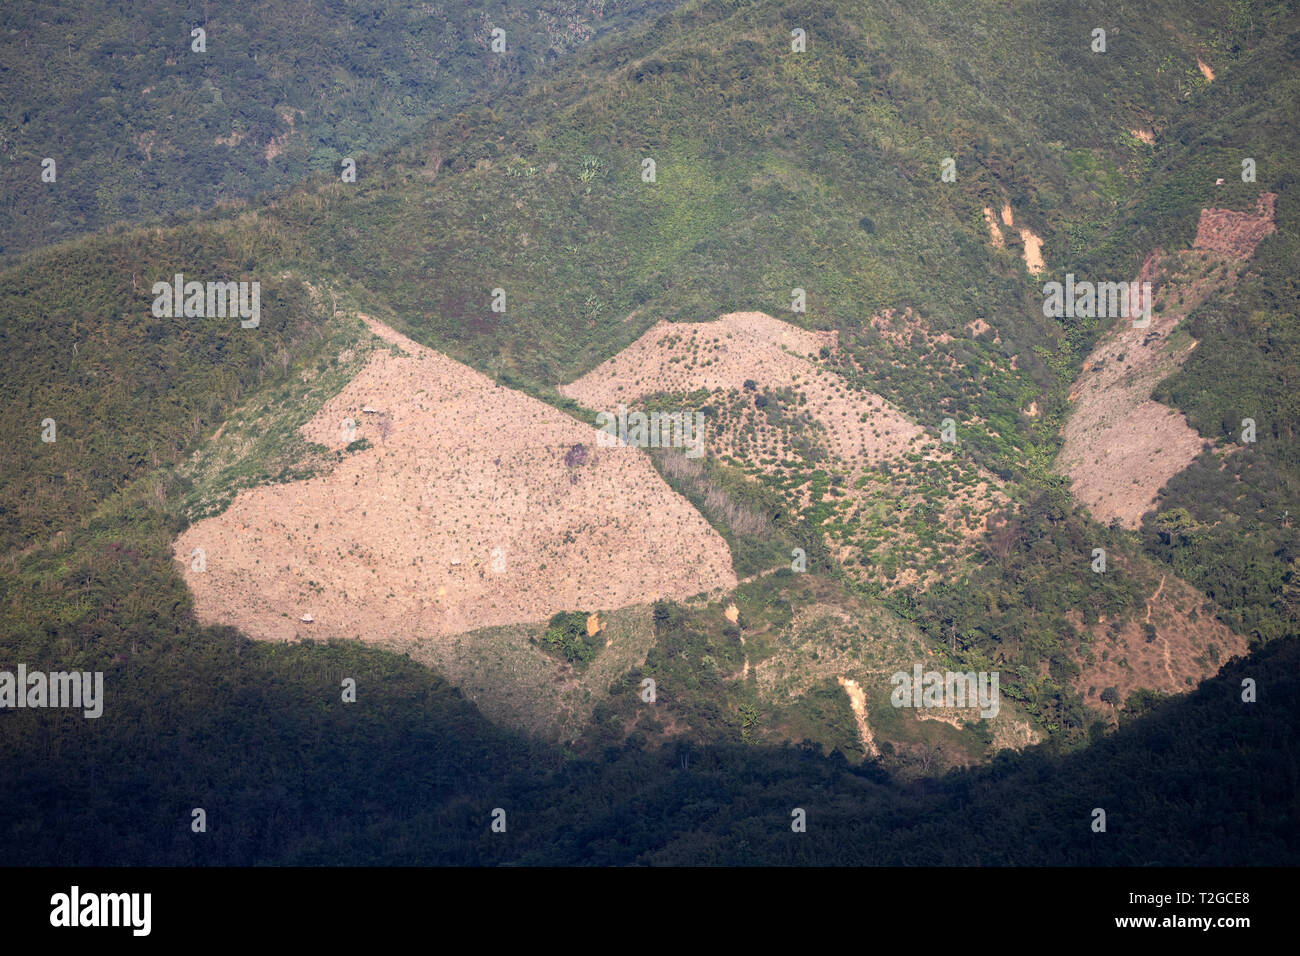 Deforestation in the hills around town of Nong Khiaw, Muang Ngoi District, Luang Prabang Province, Northern Laos, Laos, Southeast Asia Stock Photo